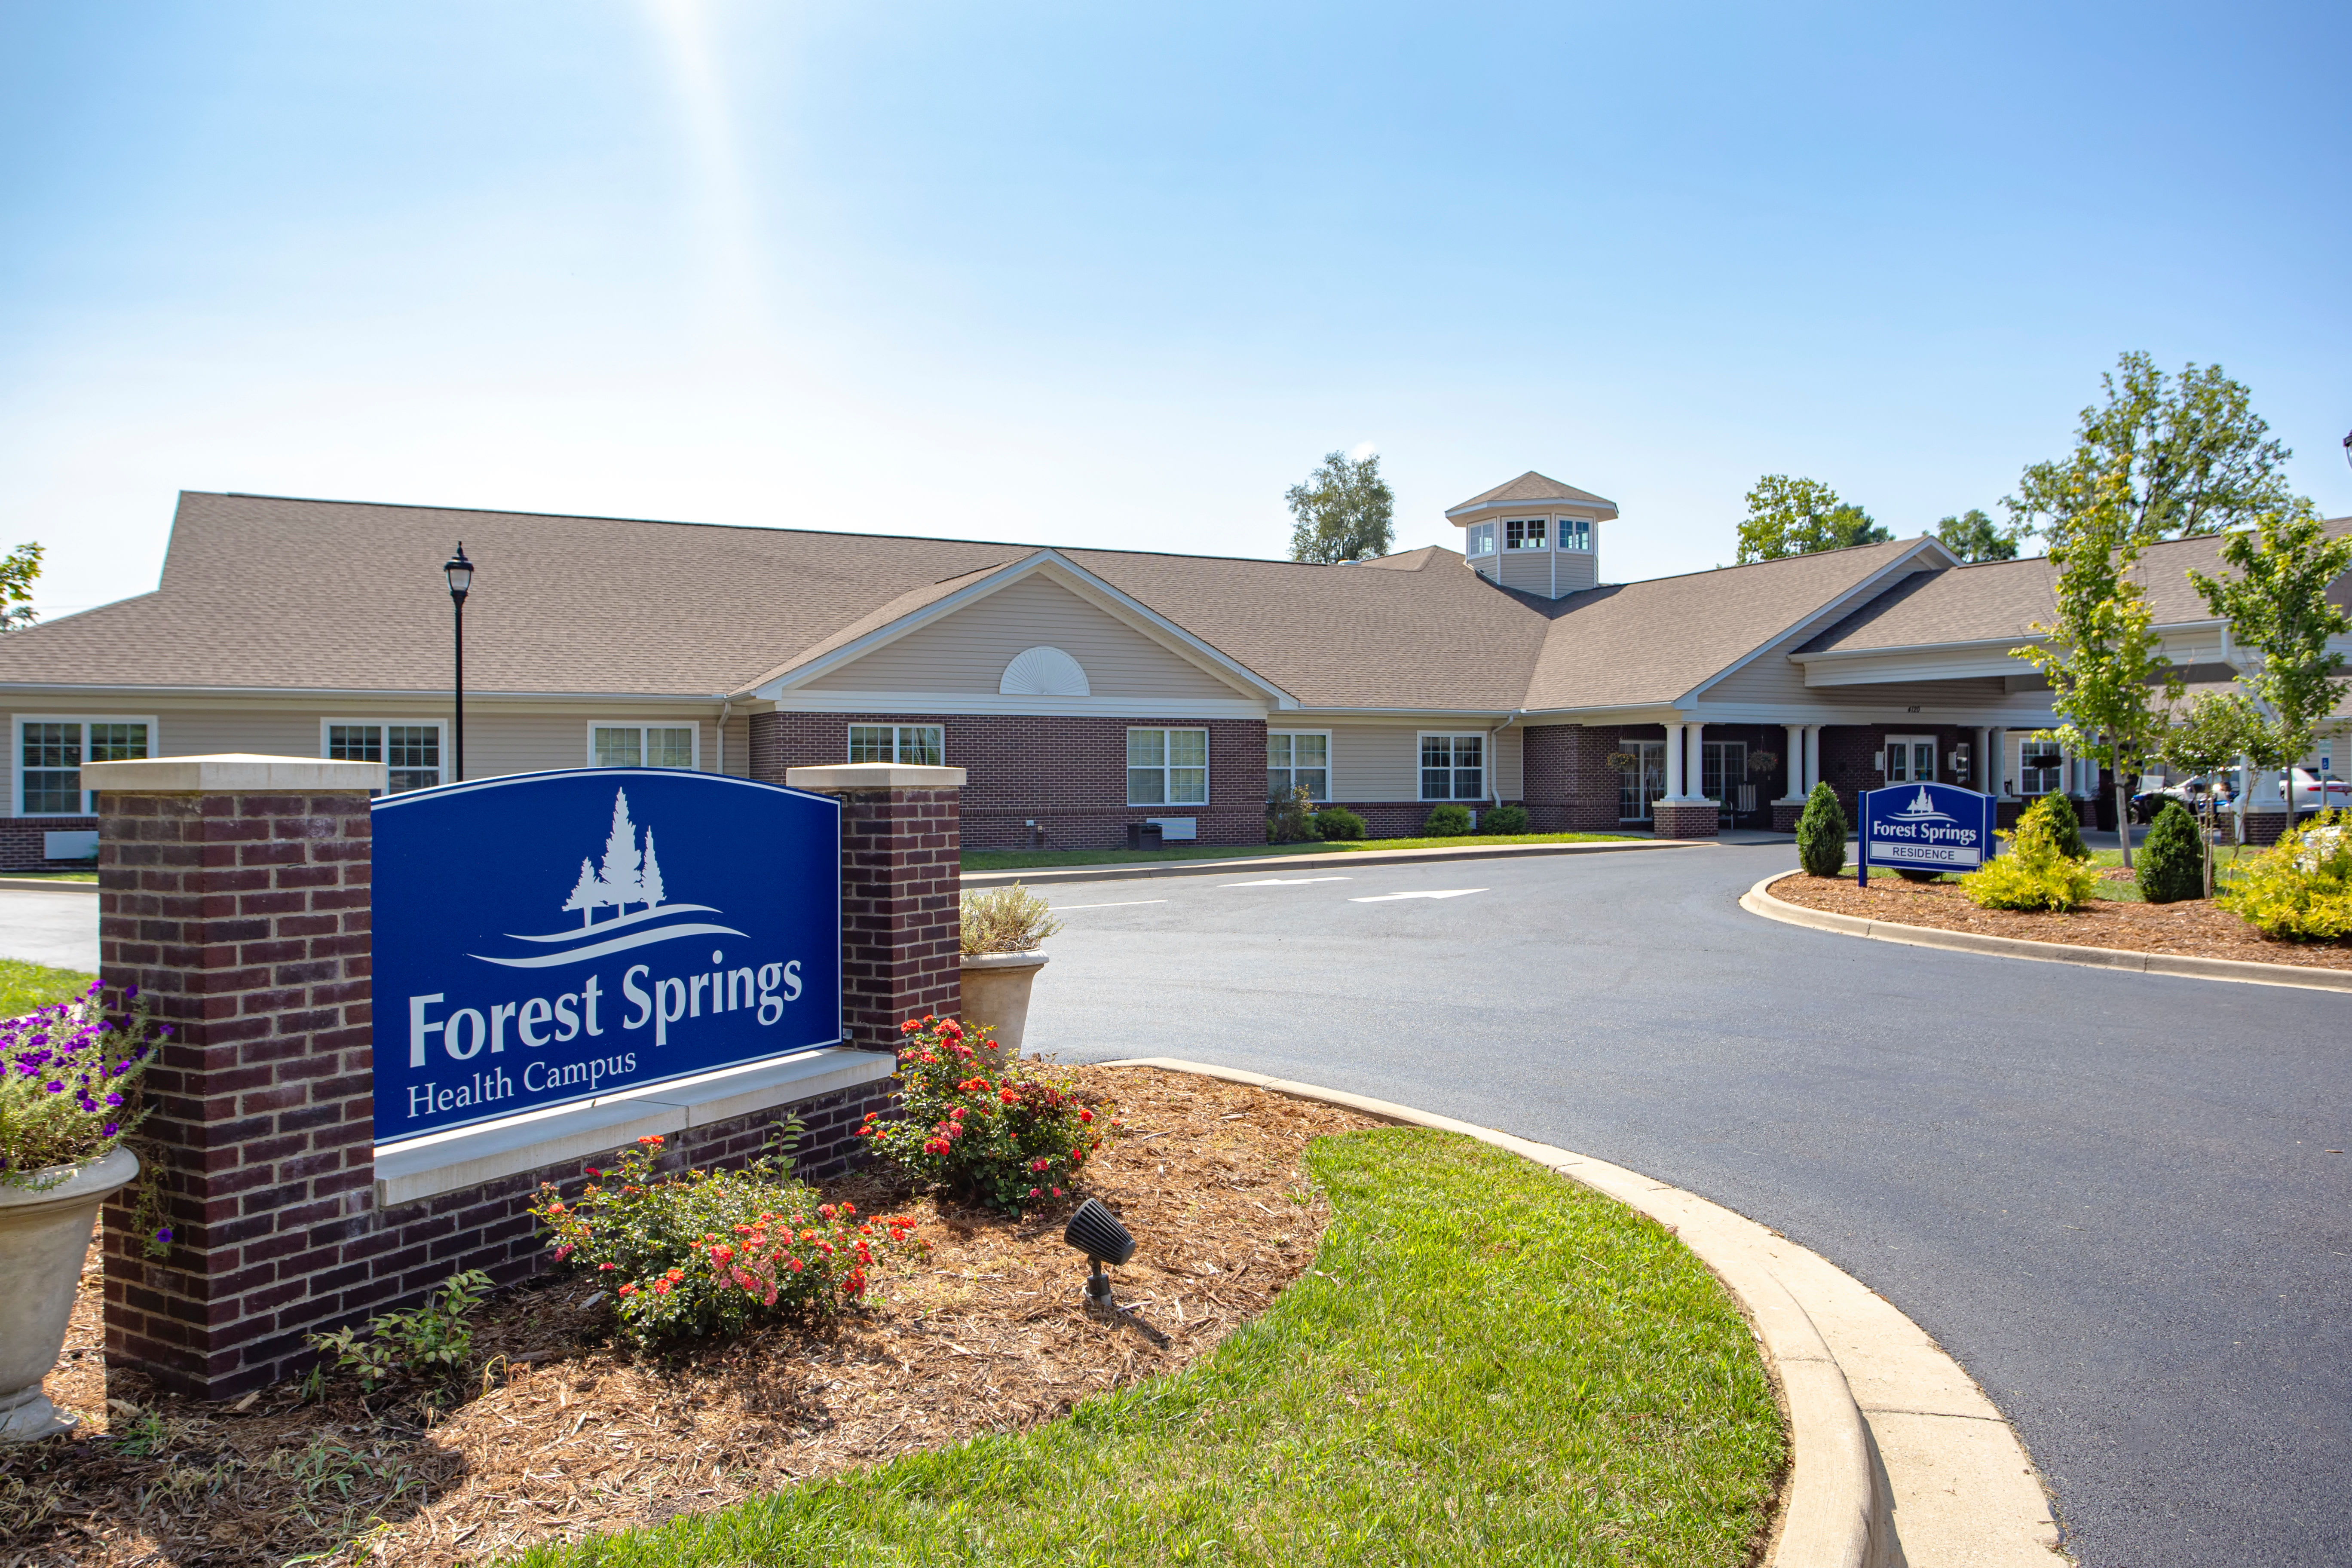 Link to Forest Springs Health Campus location